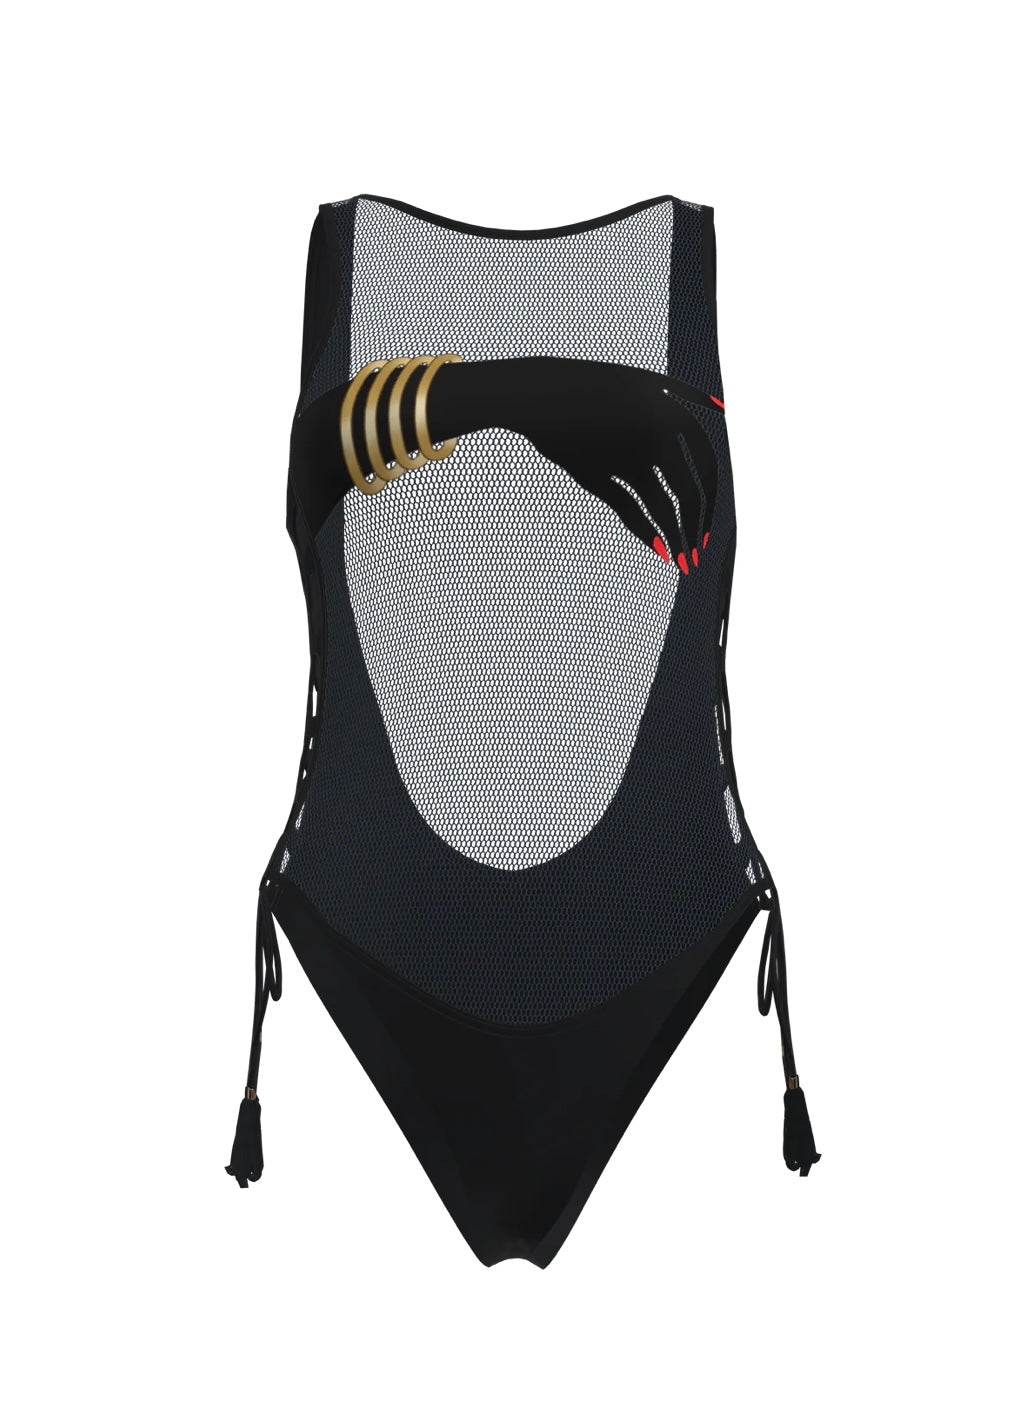 G Saints Queen of the Beach Hand Black Mesh Swimsuit (As Worn by Angela Simmons )